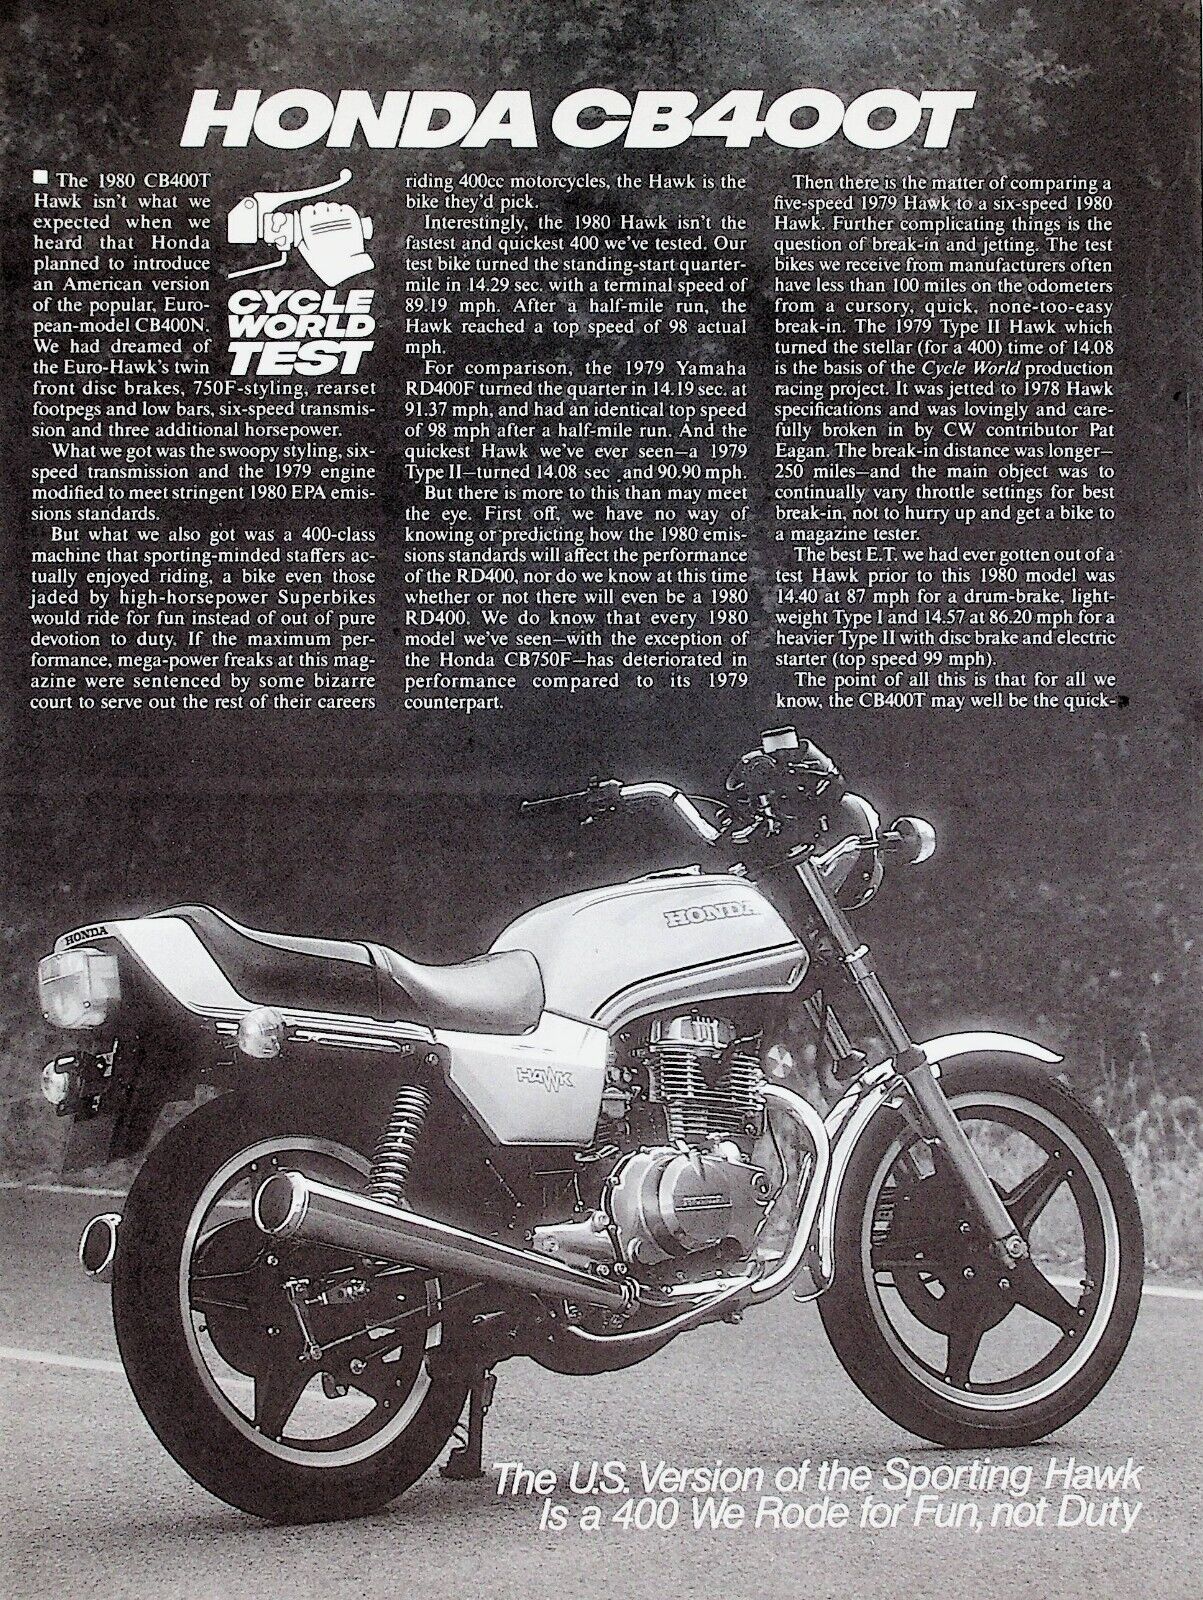 1980 Honda CB400T - 5-Page Vintage Motorcycle Test Article